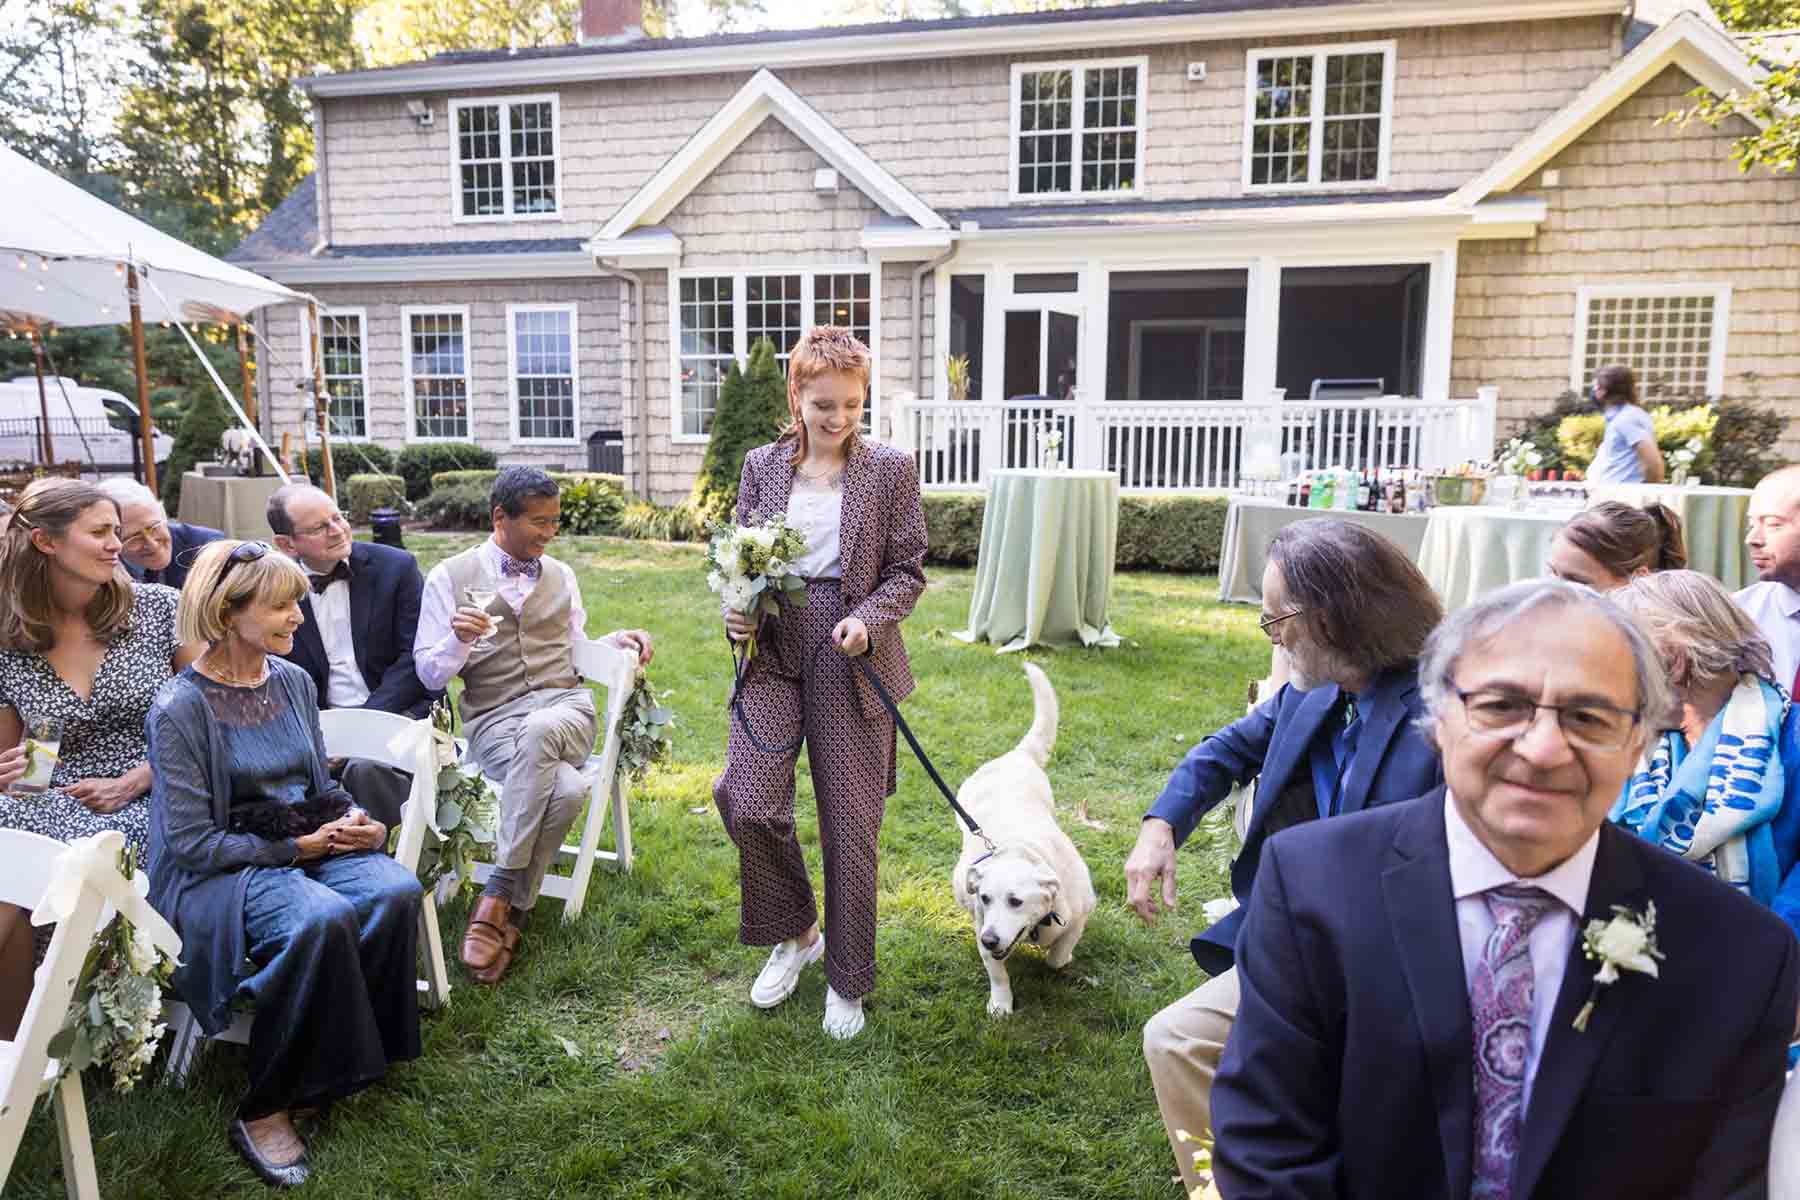 Woman leading dog on leash down aisle at wedding for an article on the best wedding jobs for family and friends